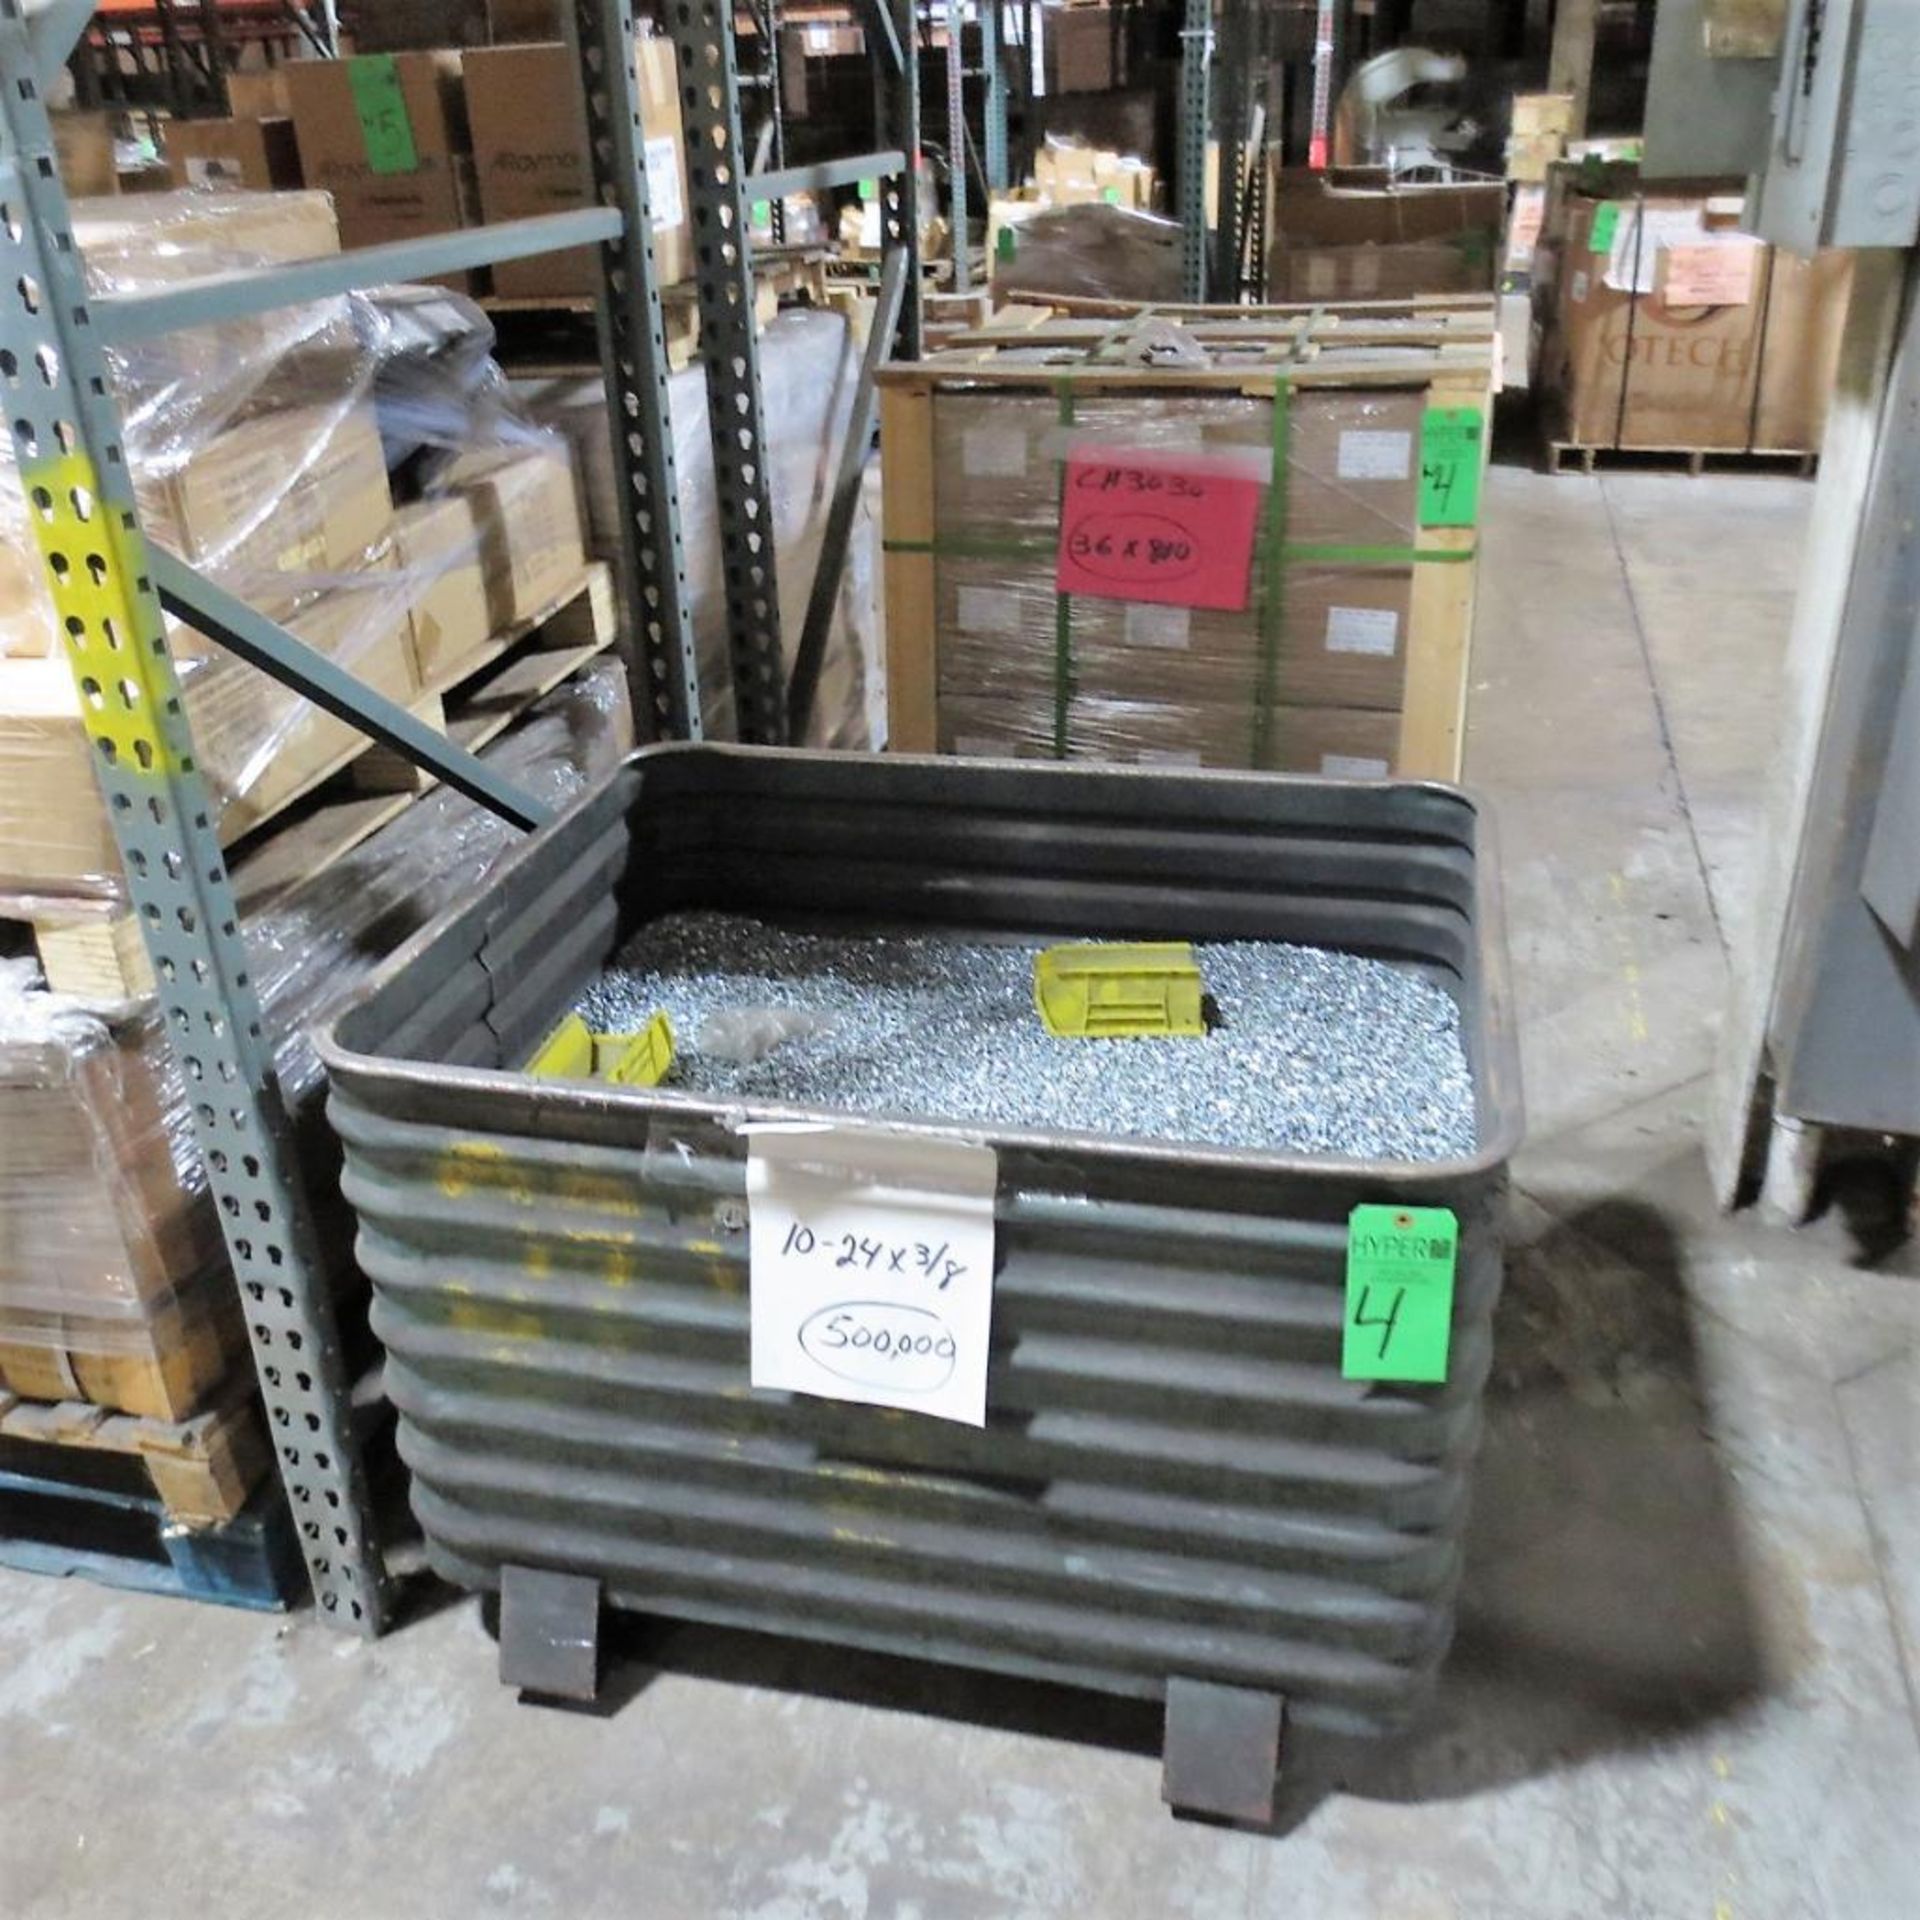 Appx. (36) Boxes on Pallet of Coat Rod Hooks Steel Z/P 800 to Box 3/16 x 4/3/4 PO22279P/N CH-3030, S